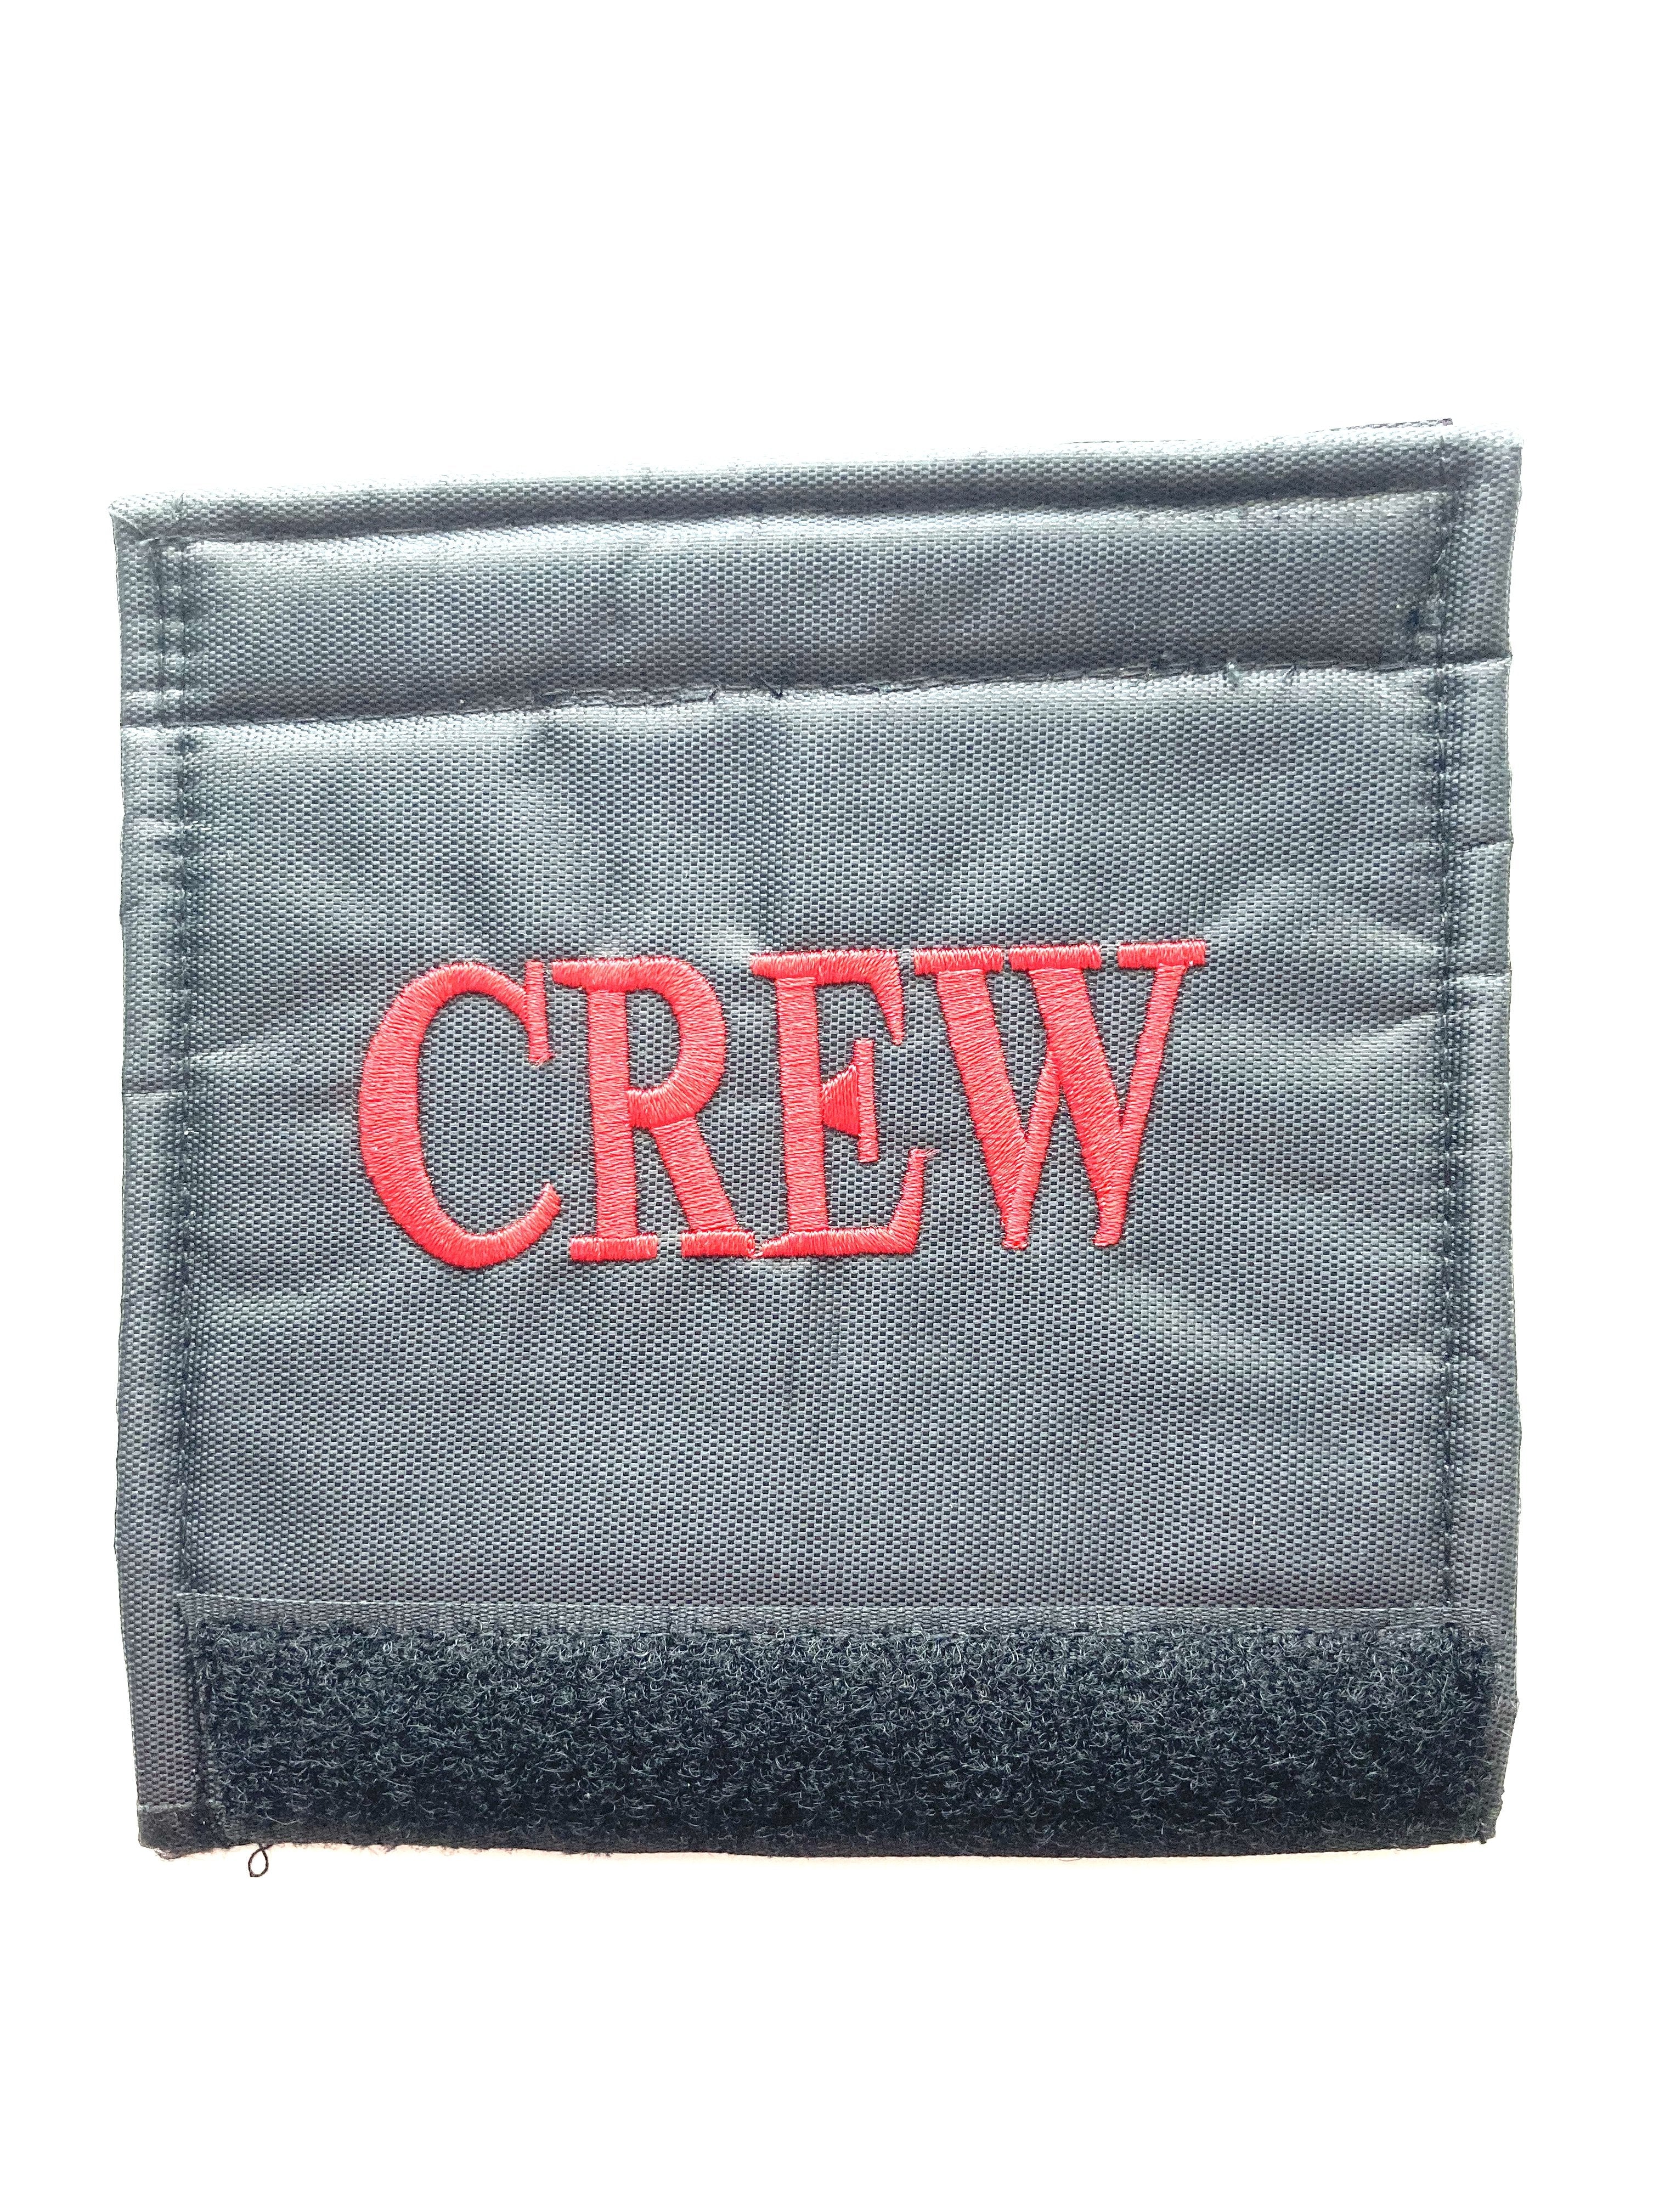 Crew Luggage Handle Cover (Red)